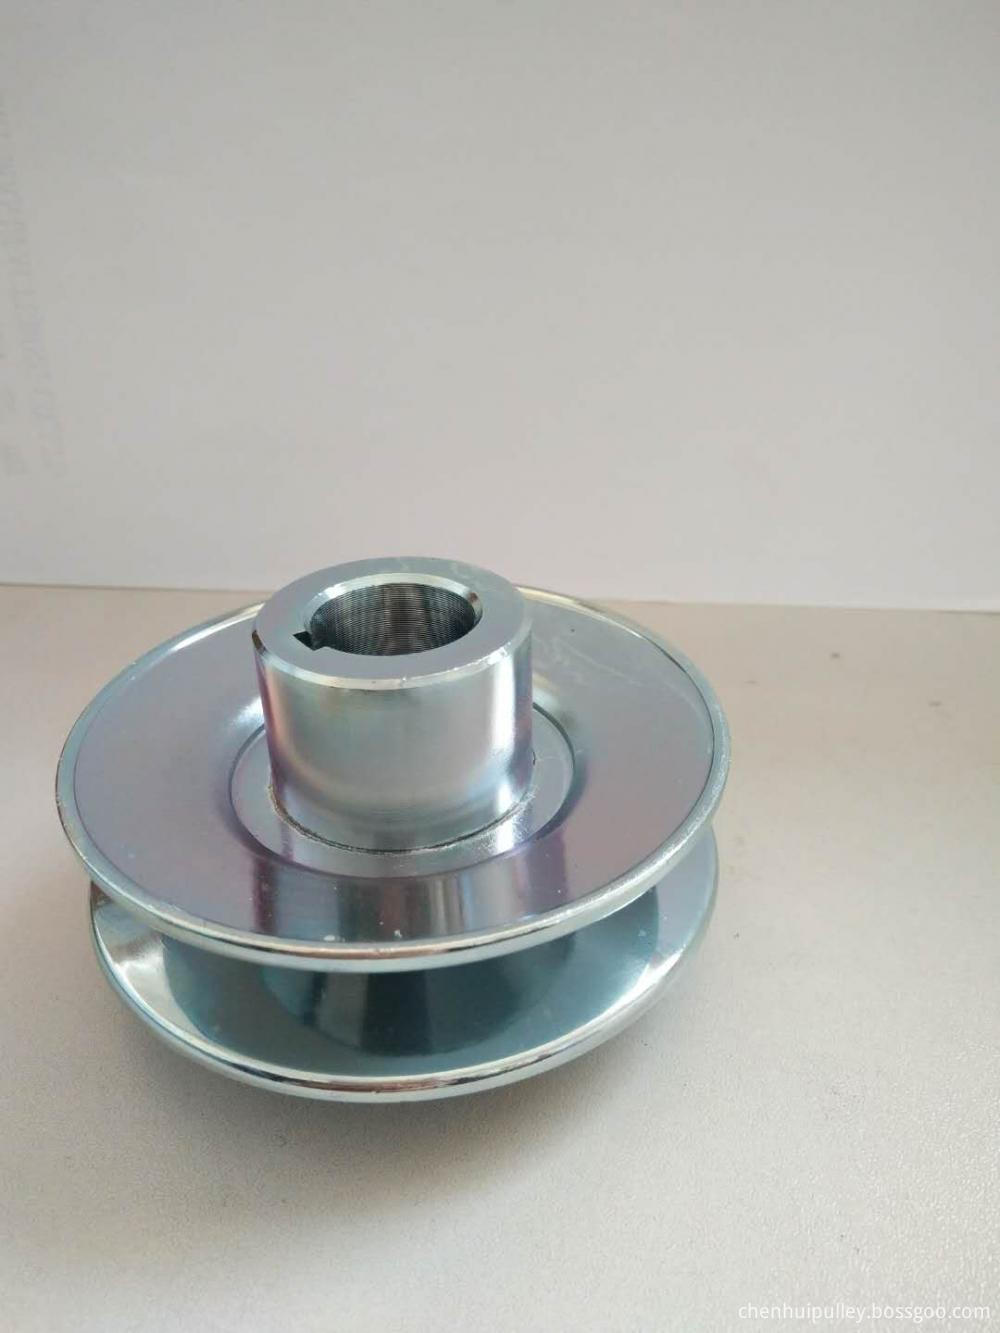 Professional factory for Lawn mower pulley